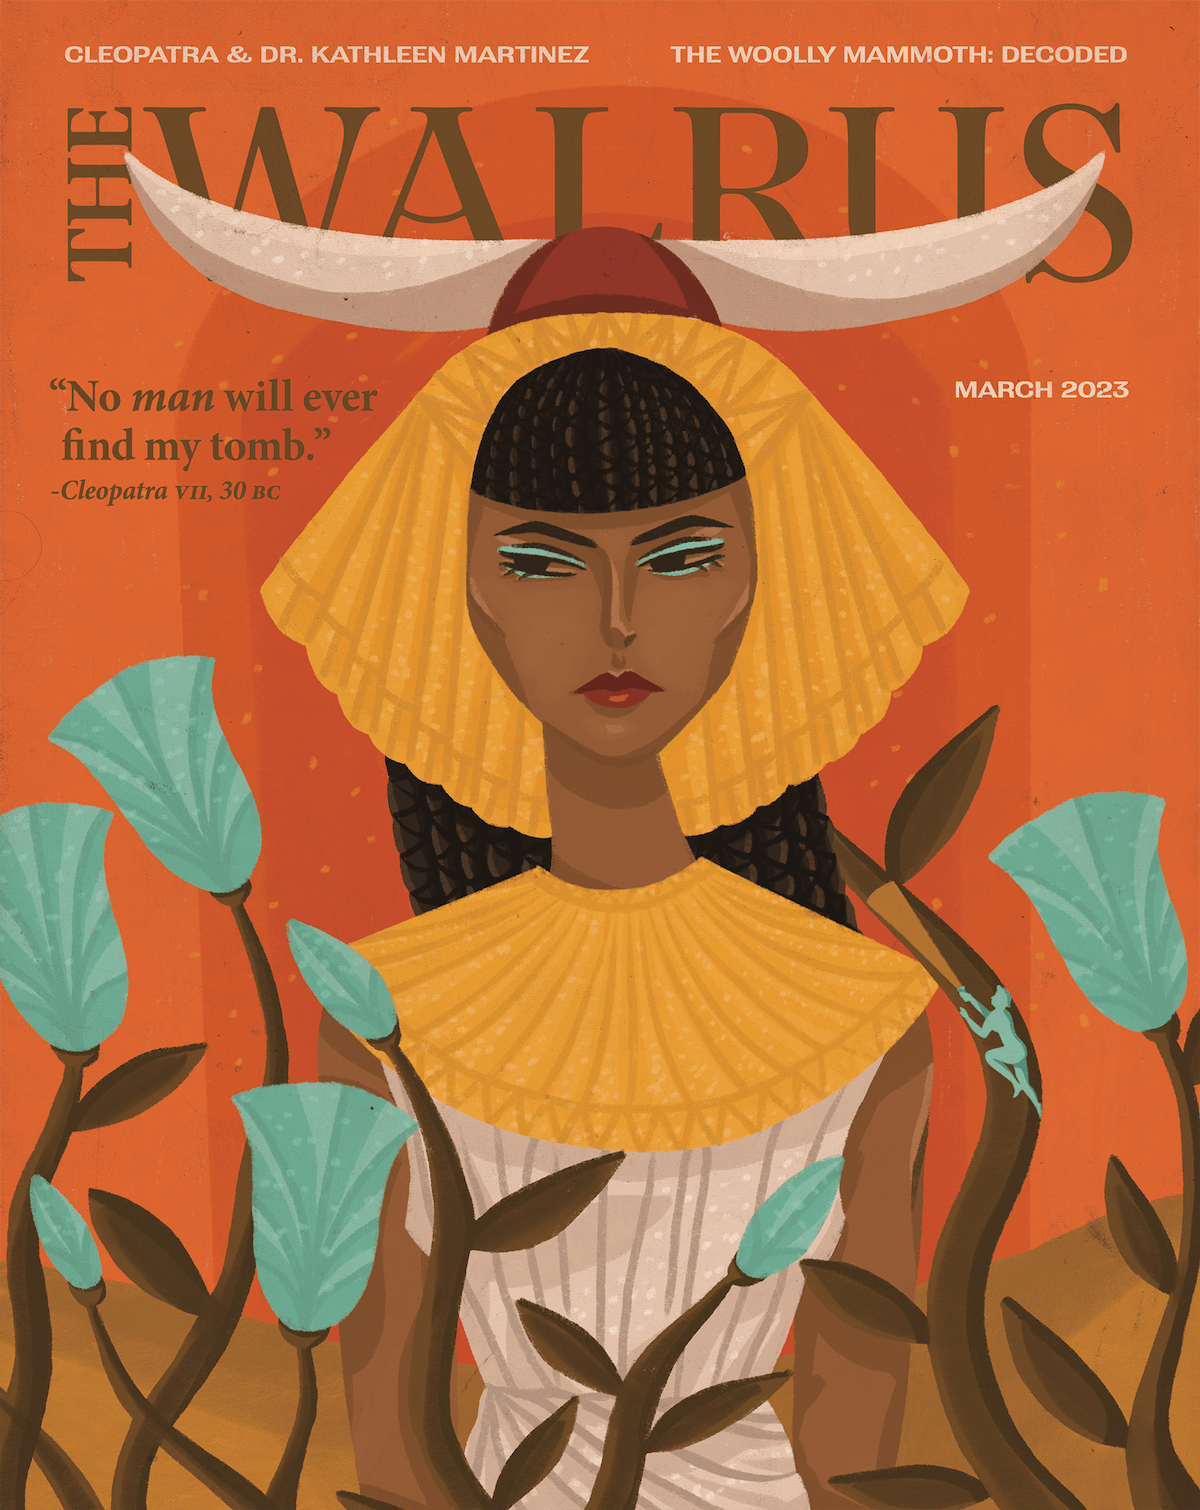 Image of the Cleopatra Walrus magazine cover